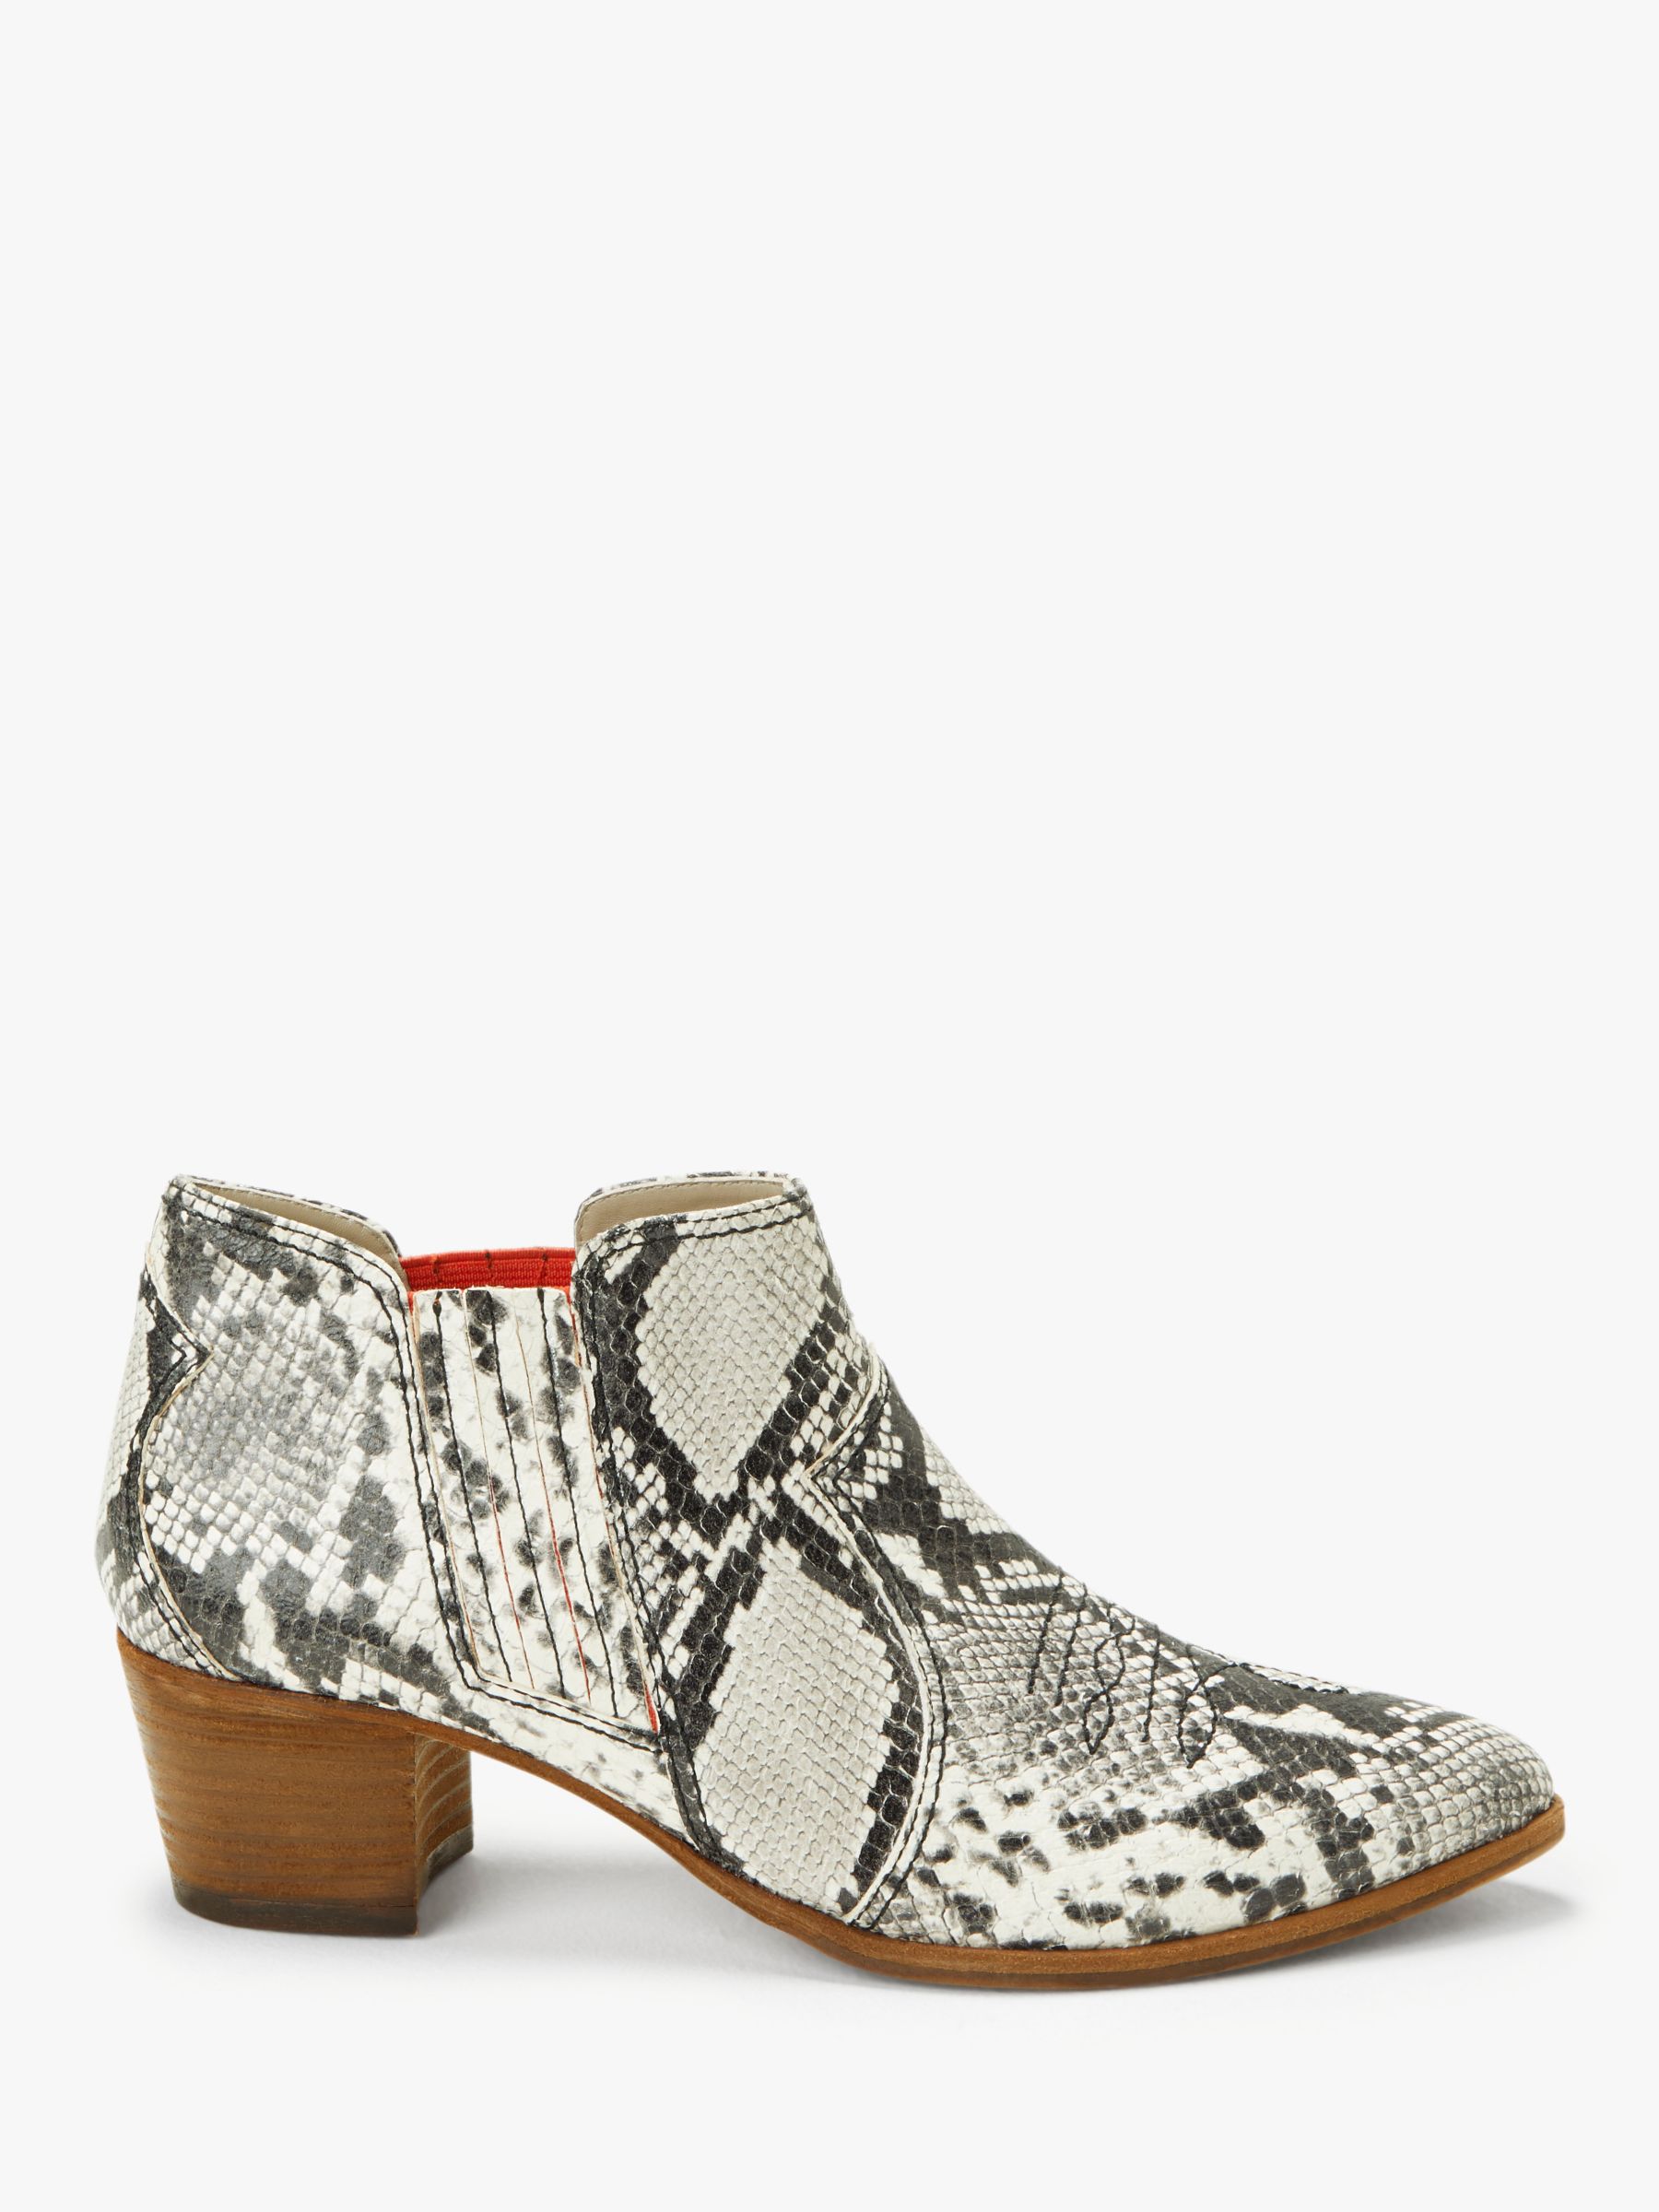 boden clifton ankle boots